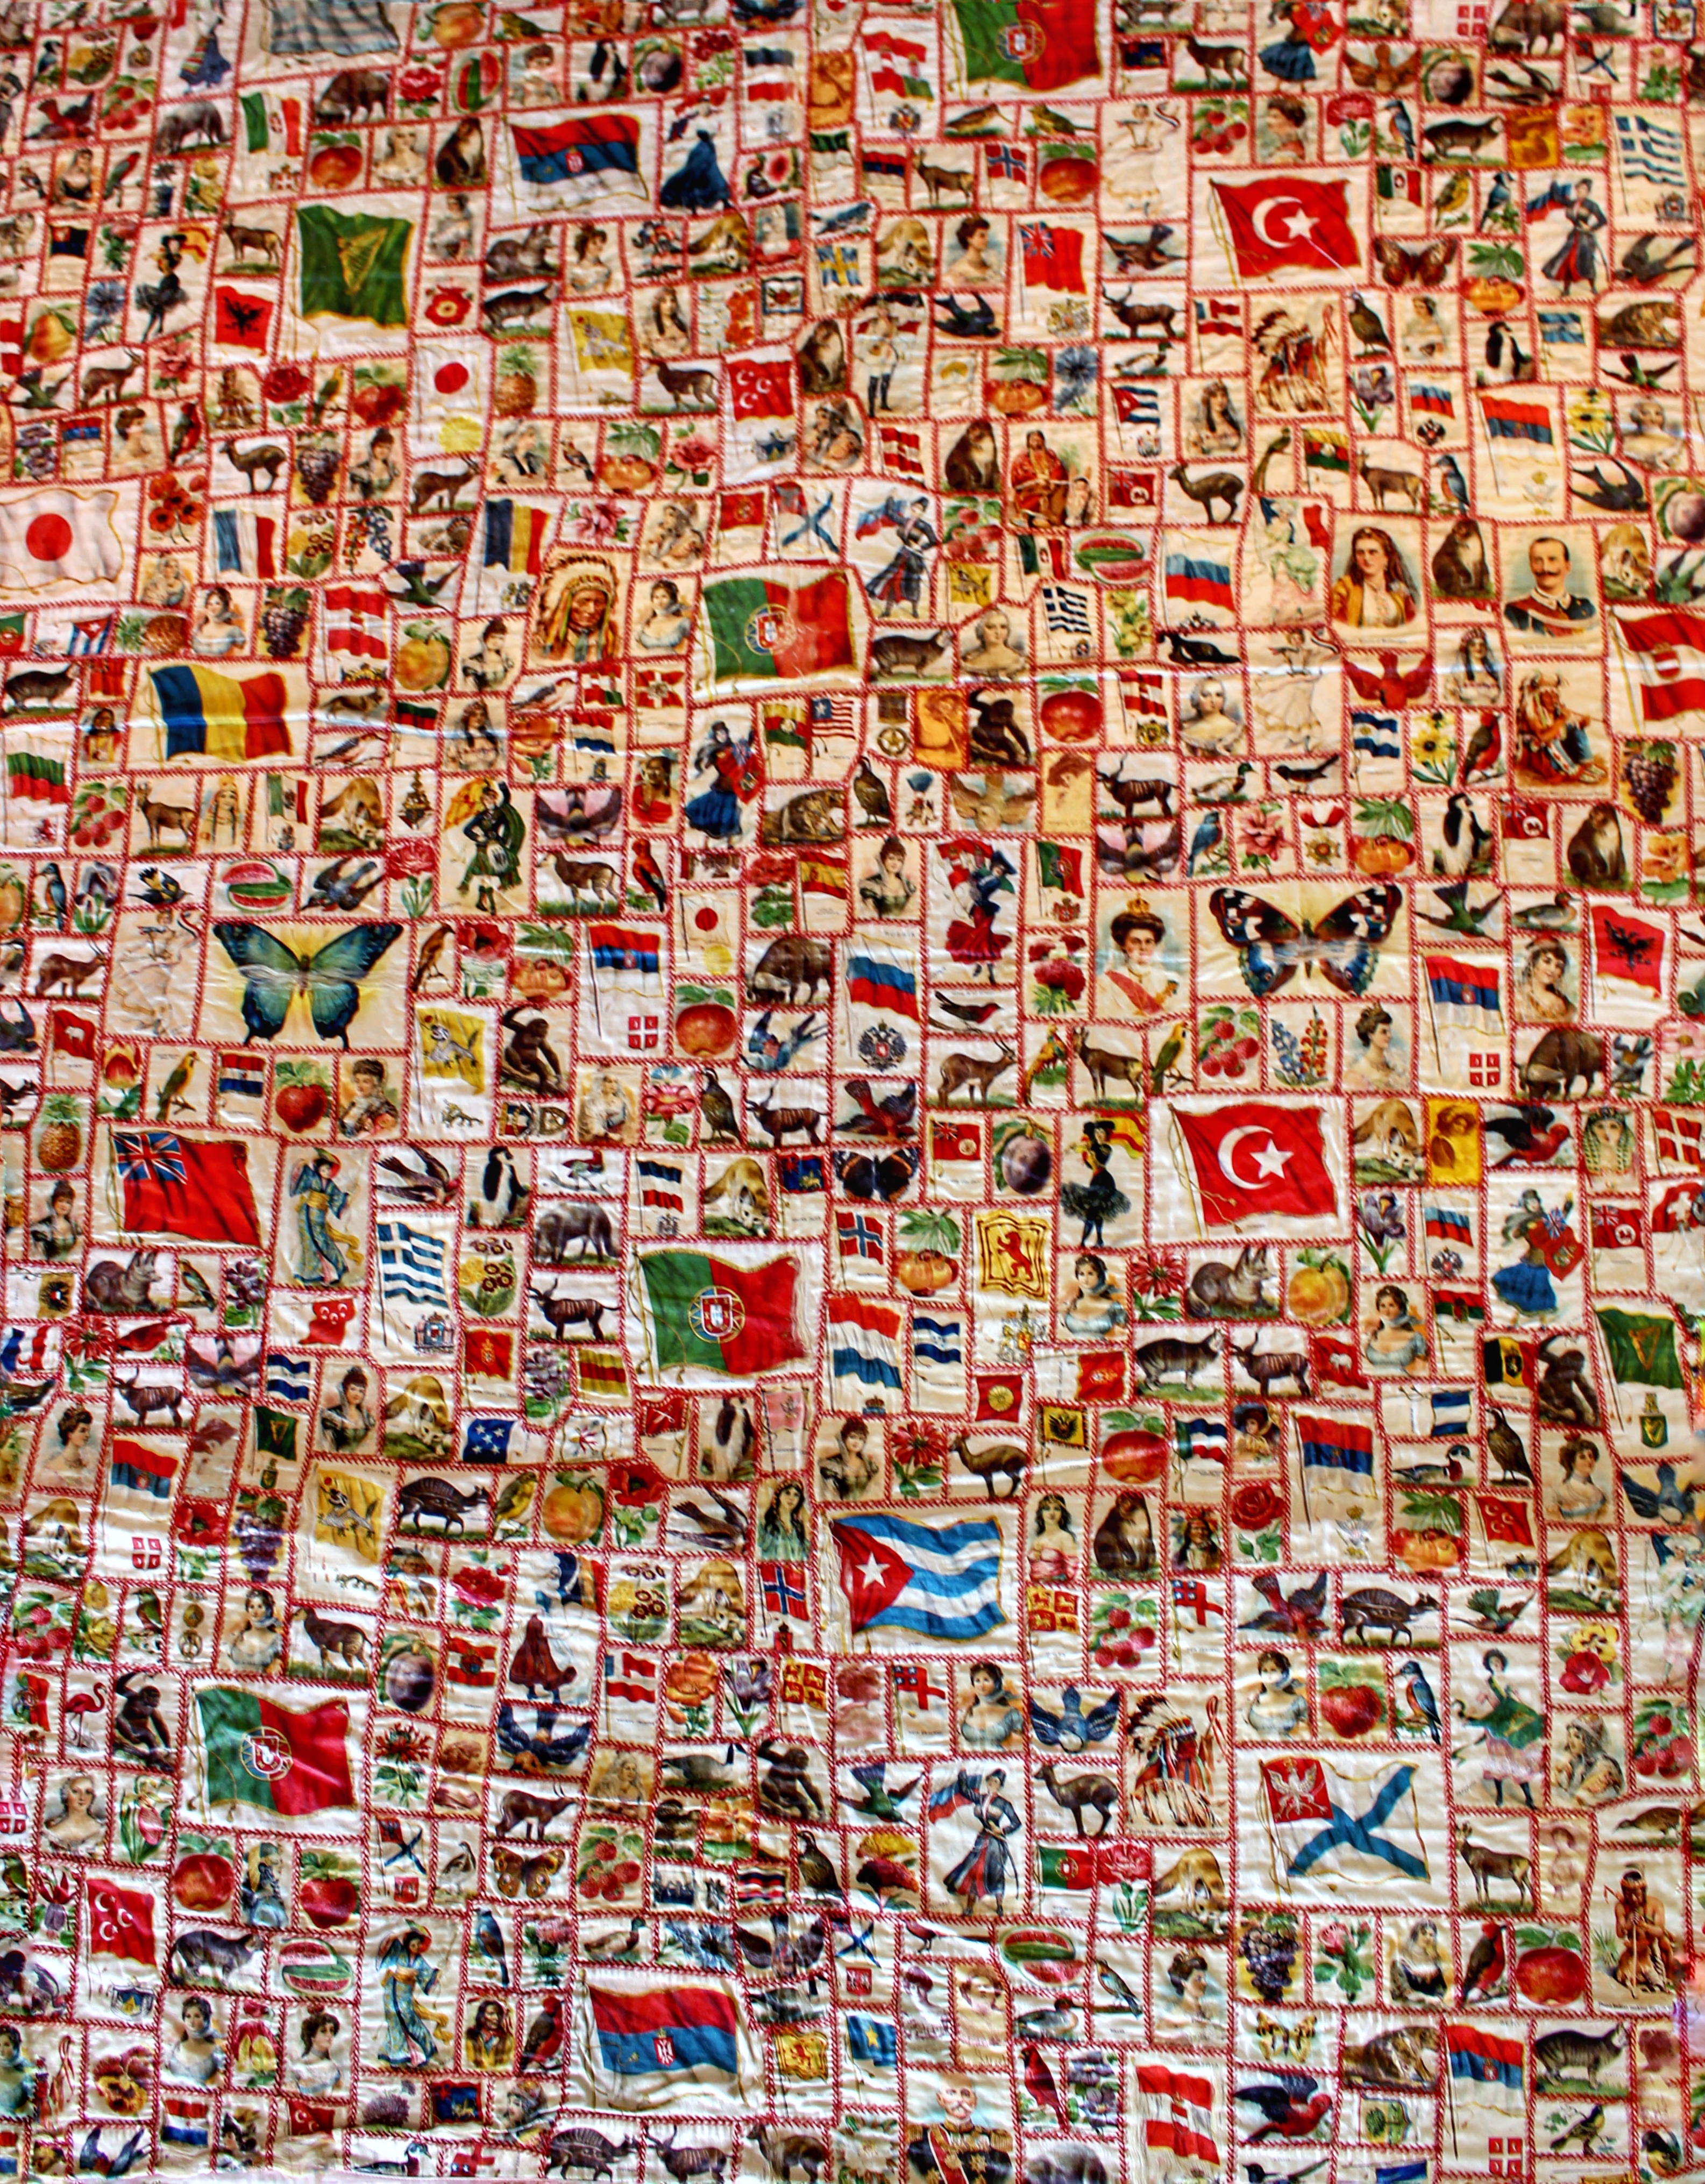 section of quilt made of cigarette silks pieced together showing flags of the world, important figures, plants and animals